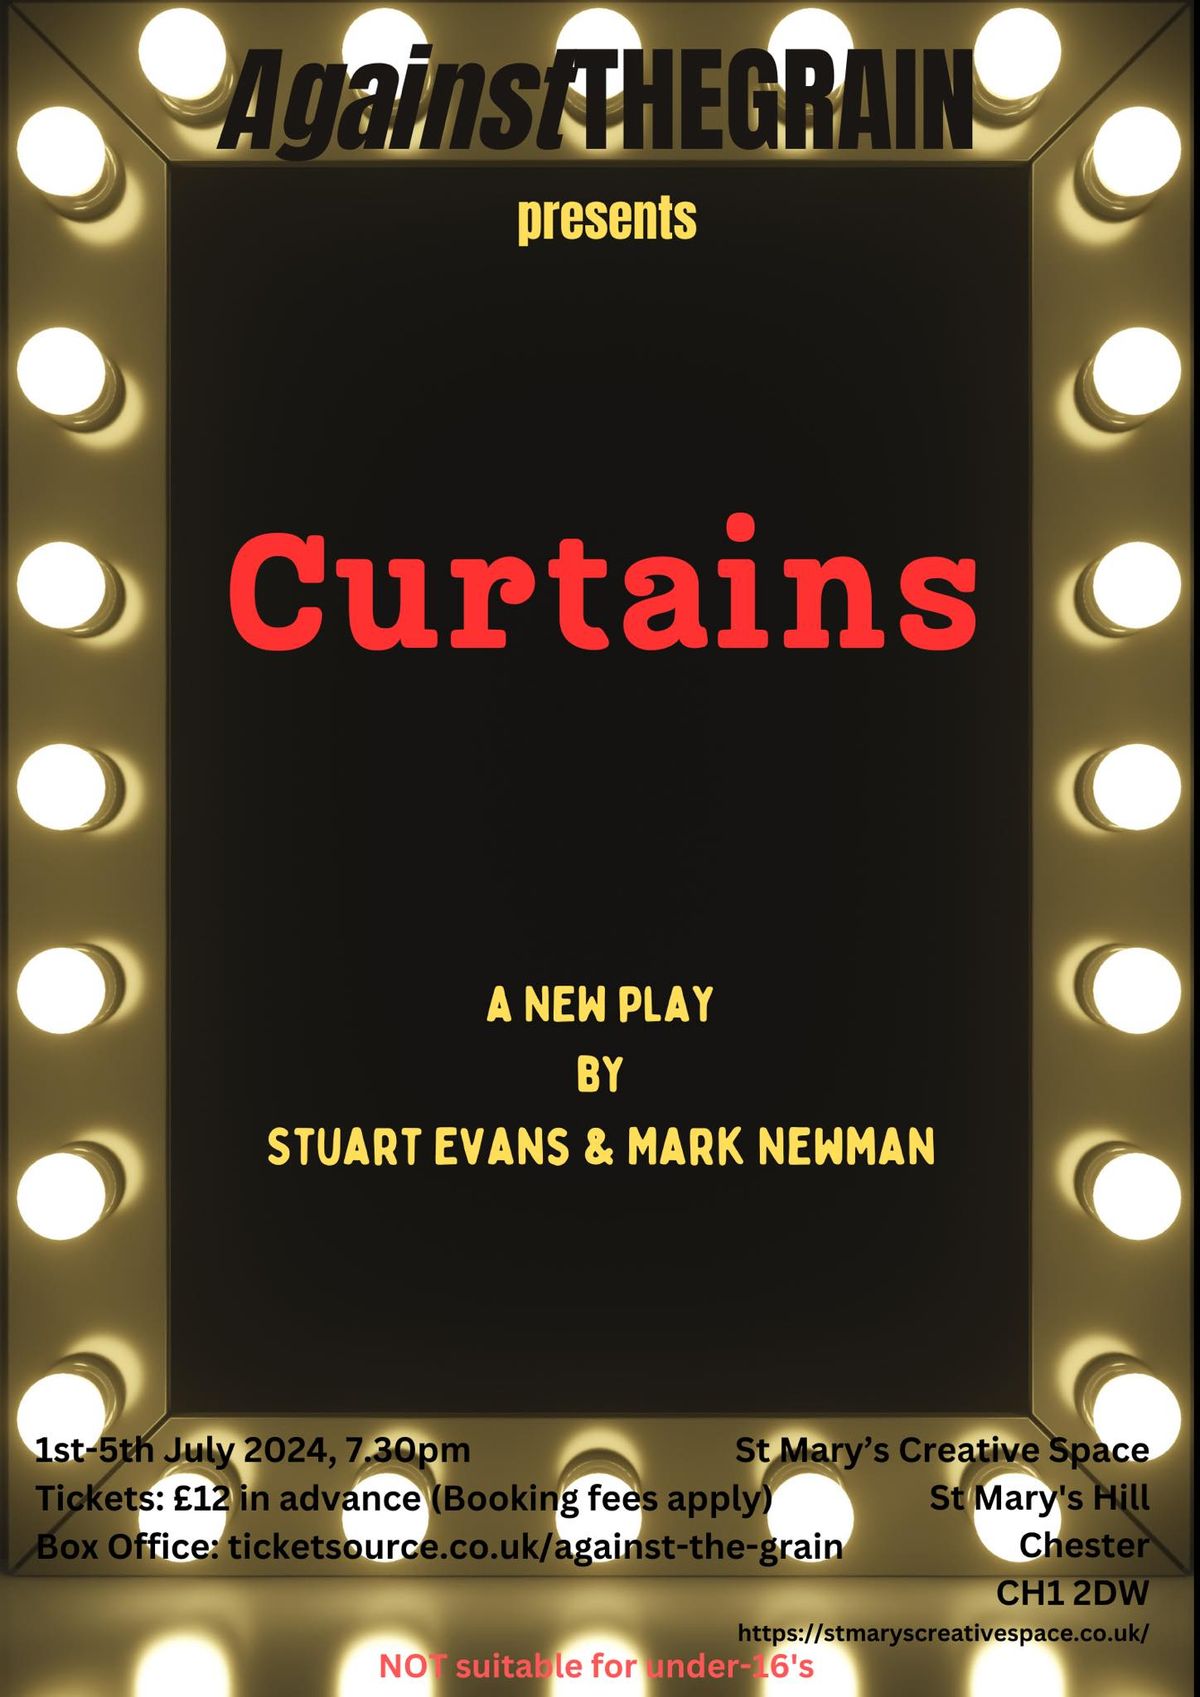 "Curtains" - a brand new play by Stuart Evans and Mark Newman